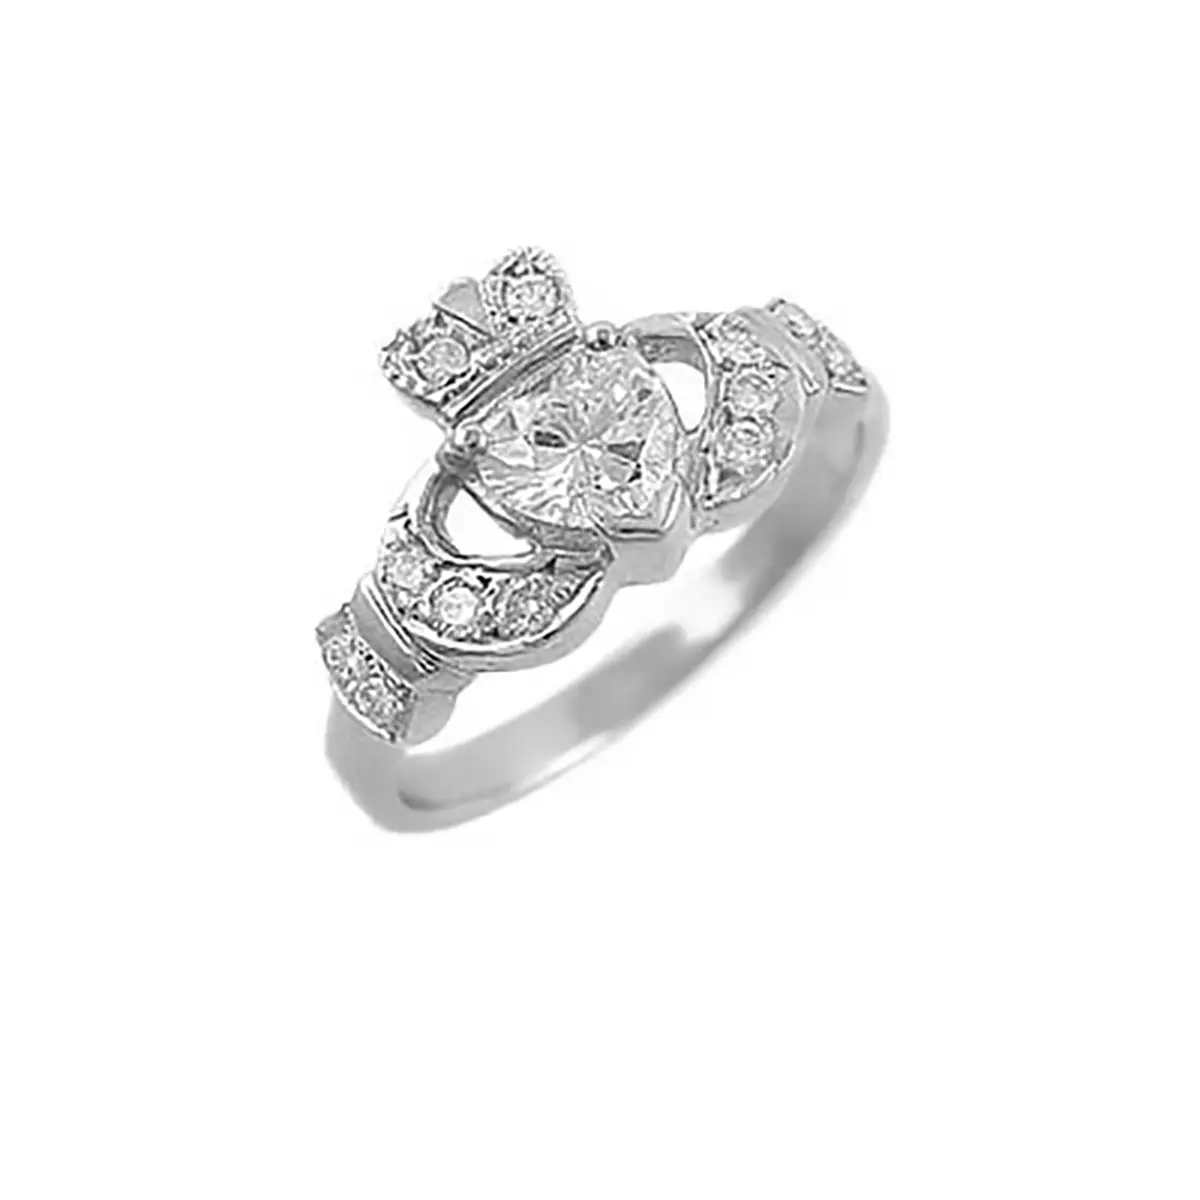 White Gold Claddagh Ring With Diamond